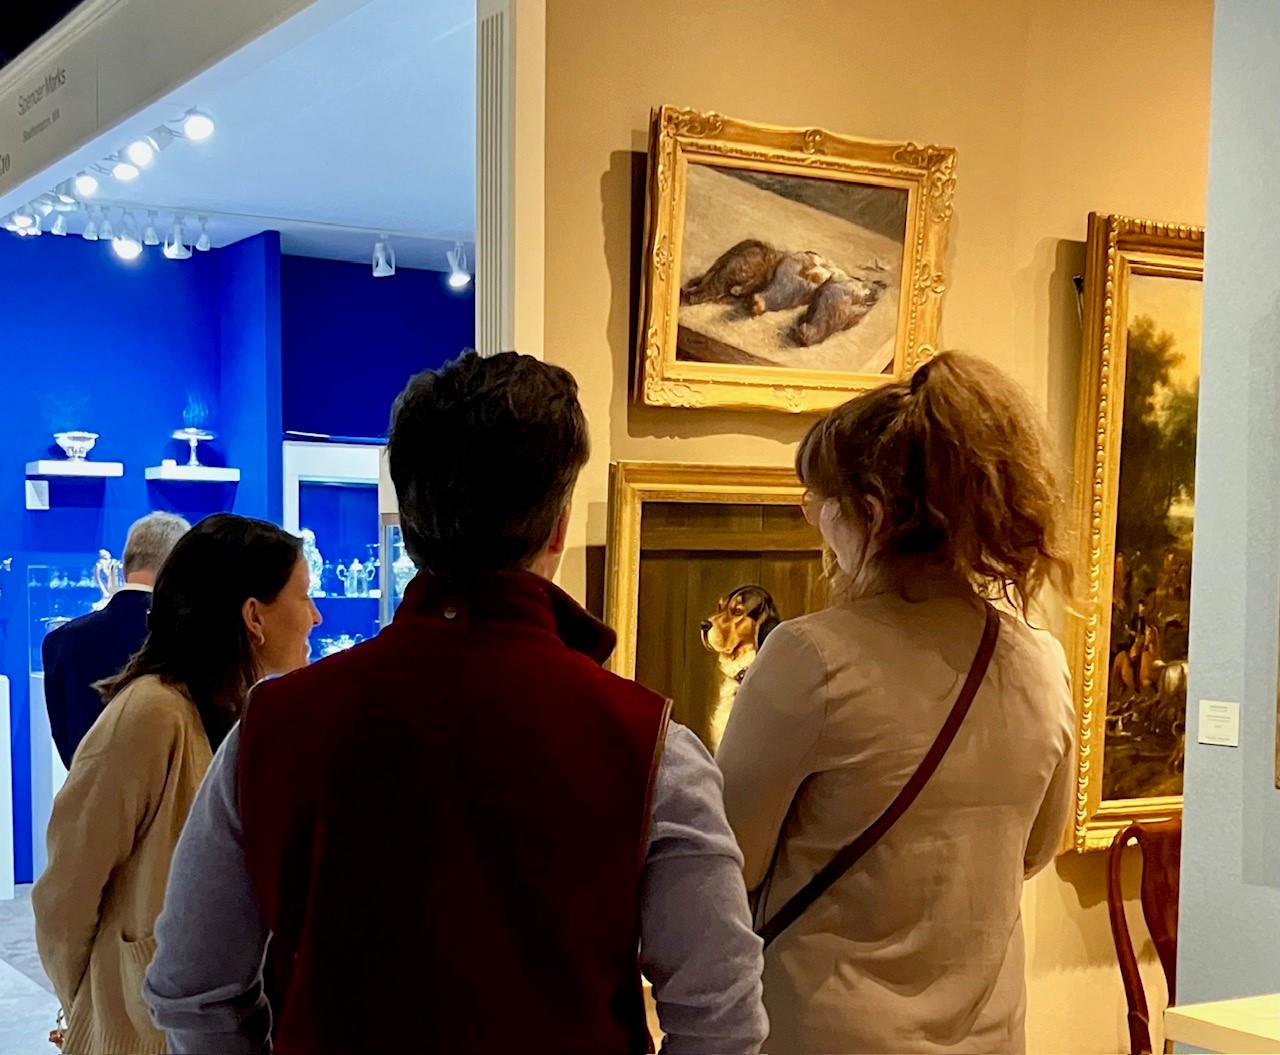 This image shows three people looking at a specific artwork